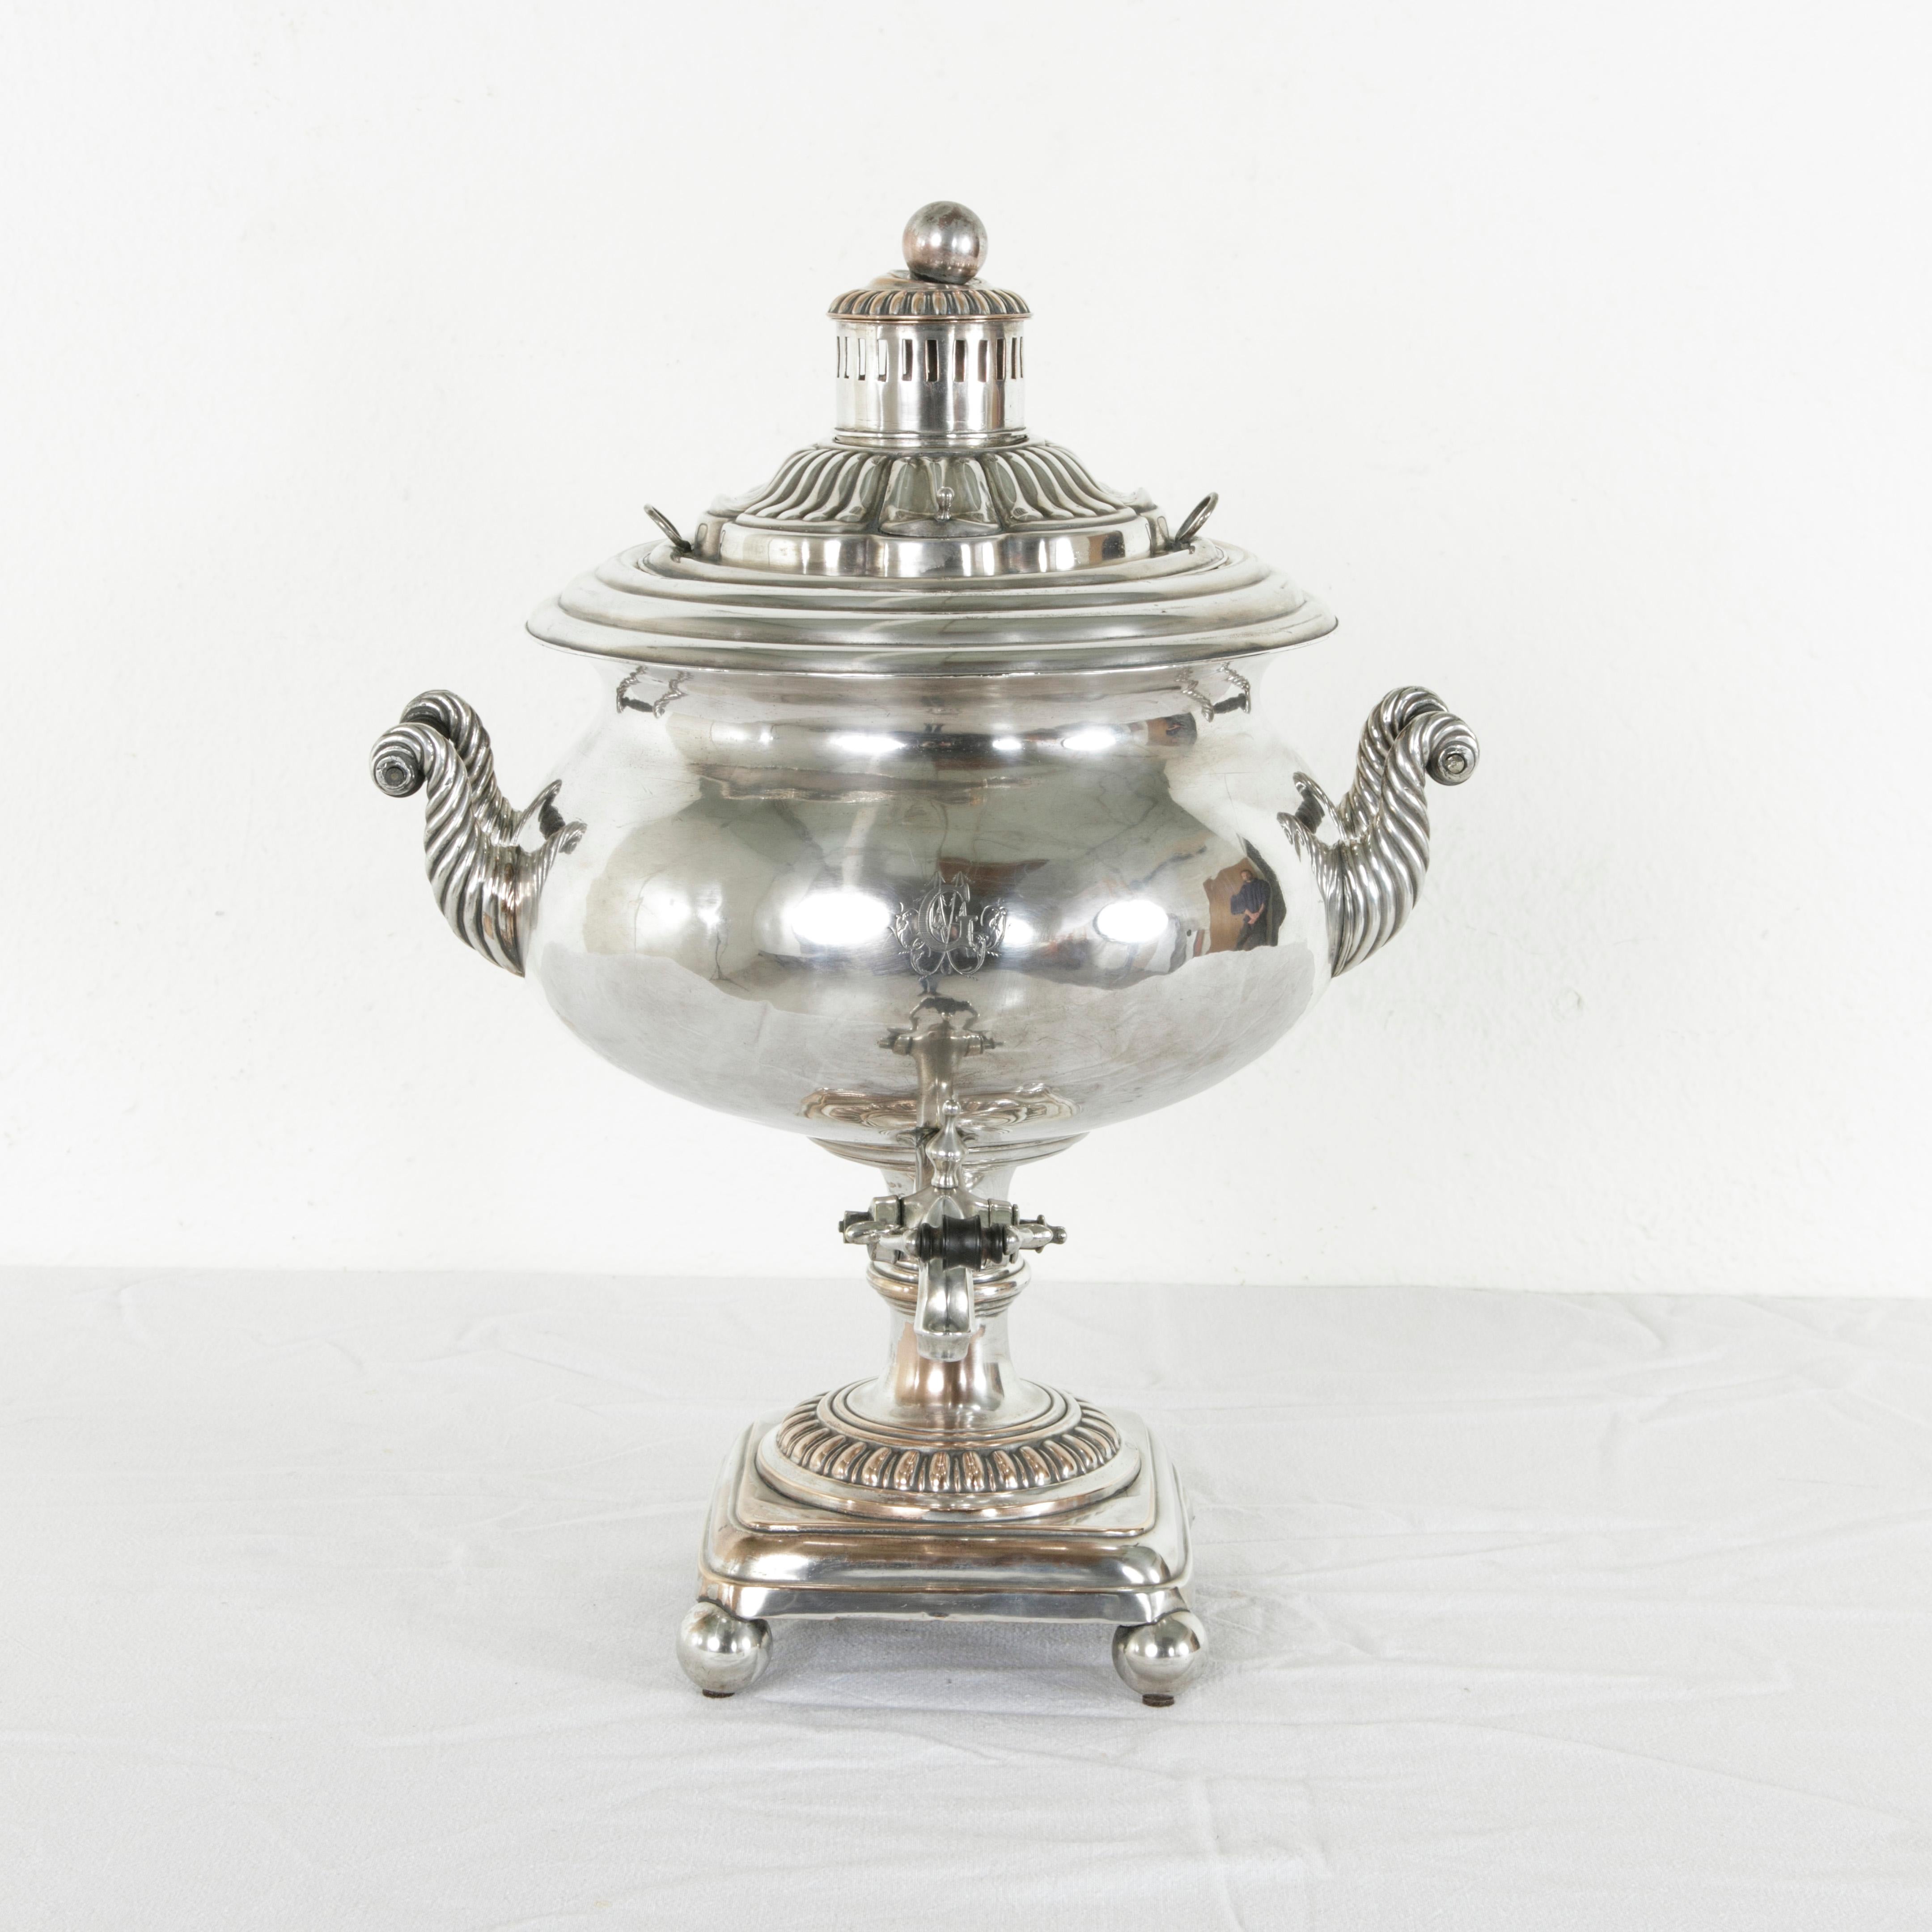 Originally used to serve tea, this late 19th century silver plate samovar or tea urn features an engraved monogram G surrounded by leaves above its serving spout. A scrolled handle on each side is fitted with an ebonized wooden bar that allows for